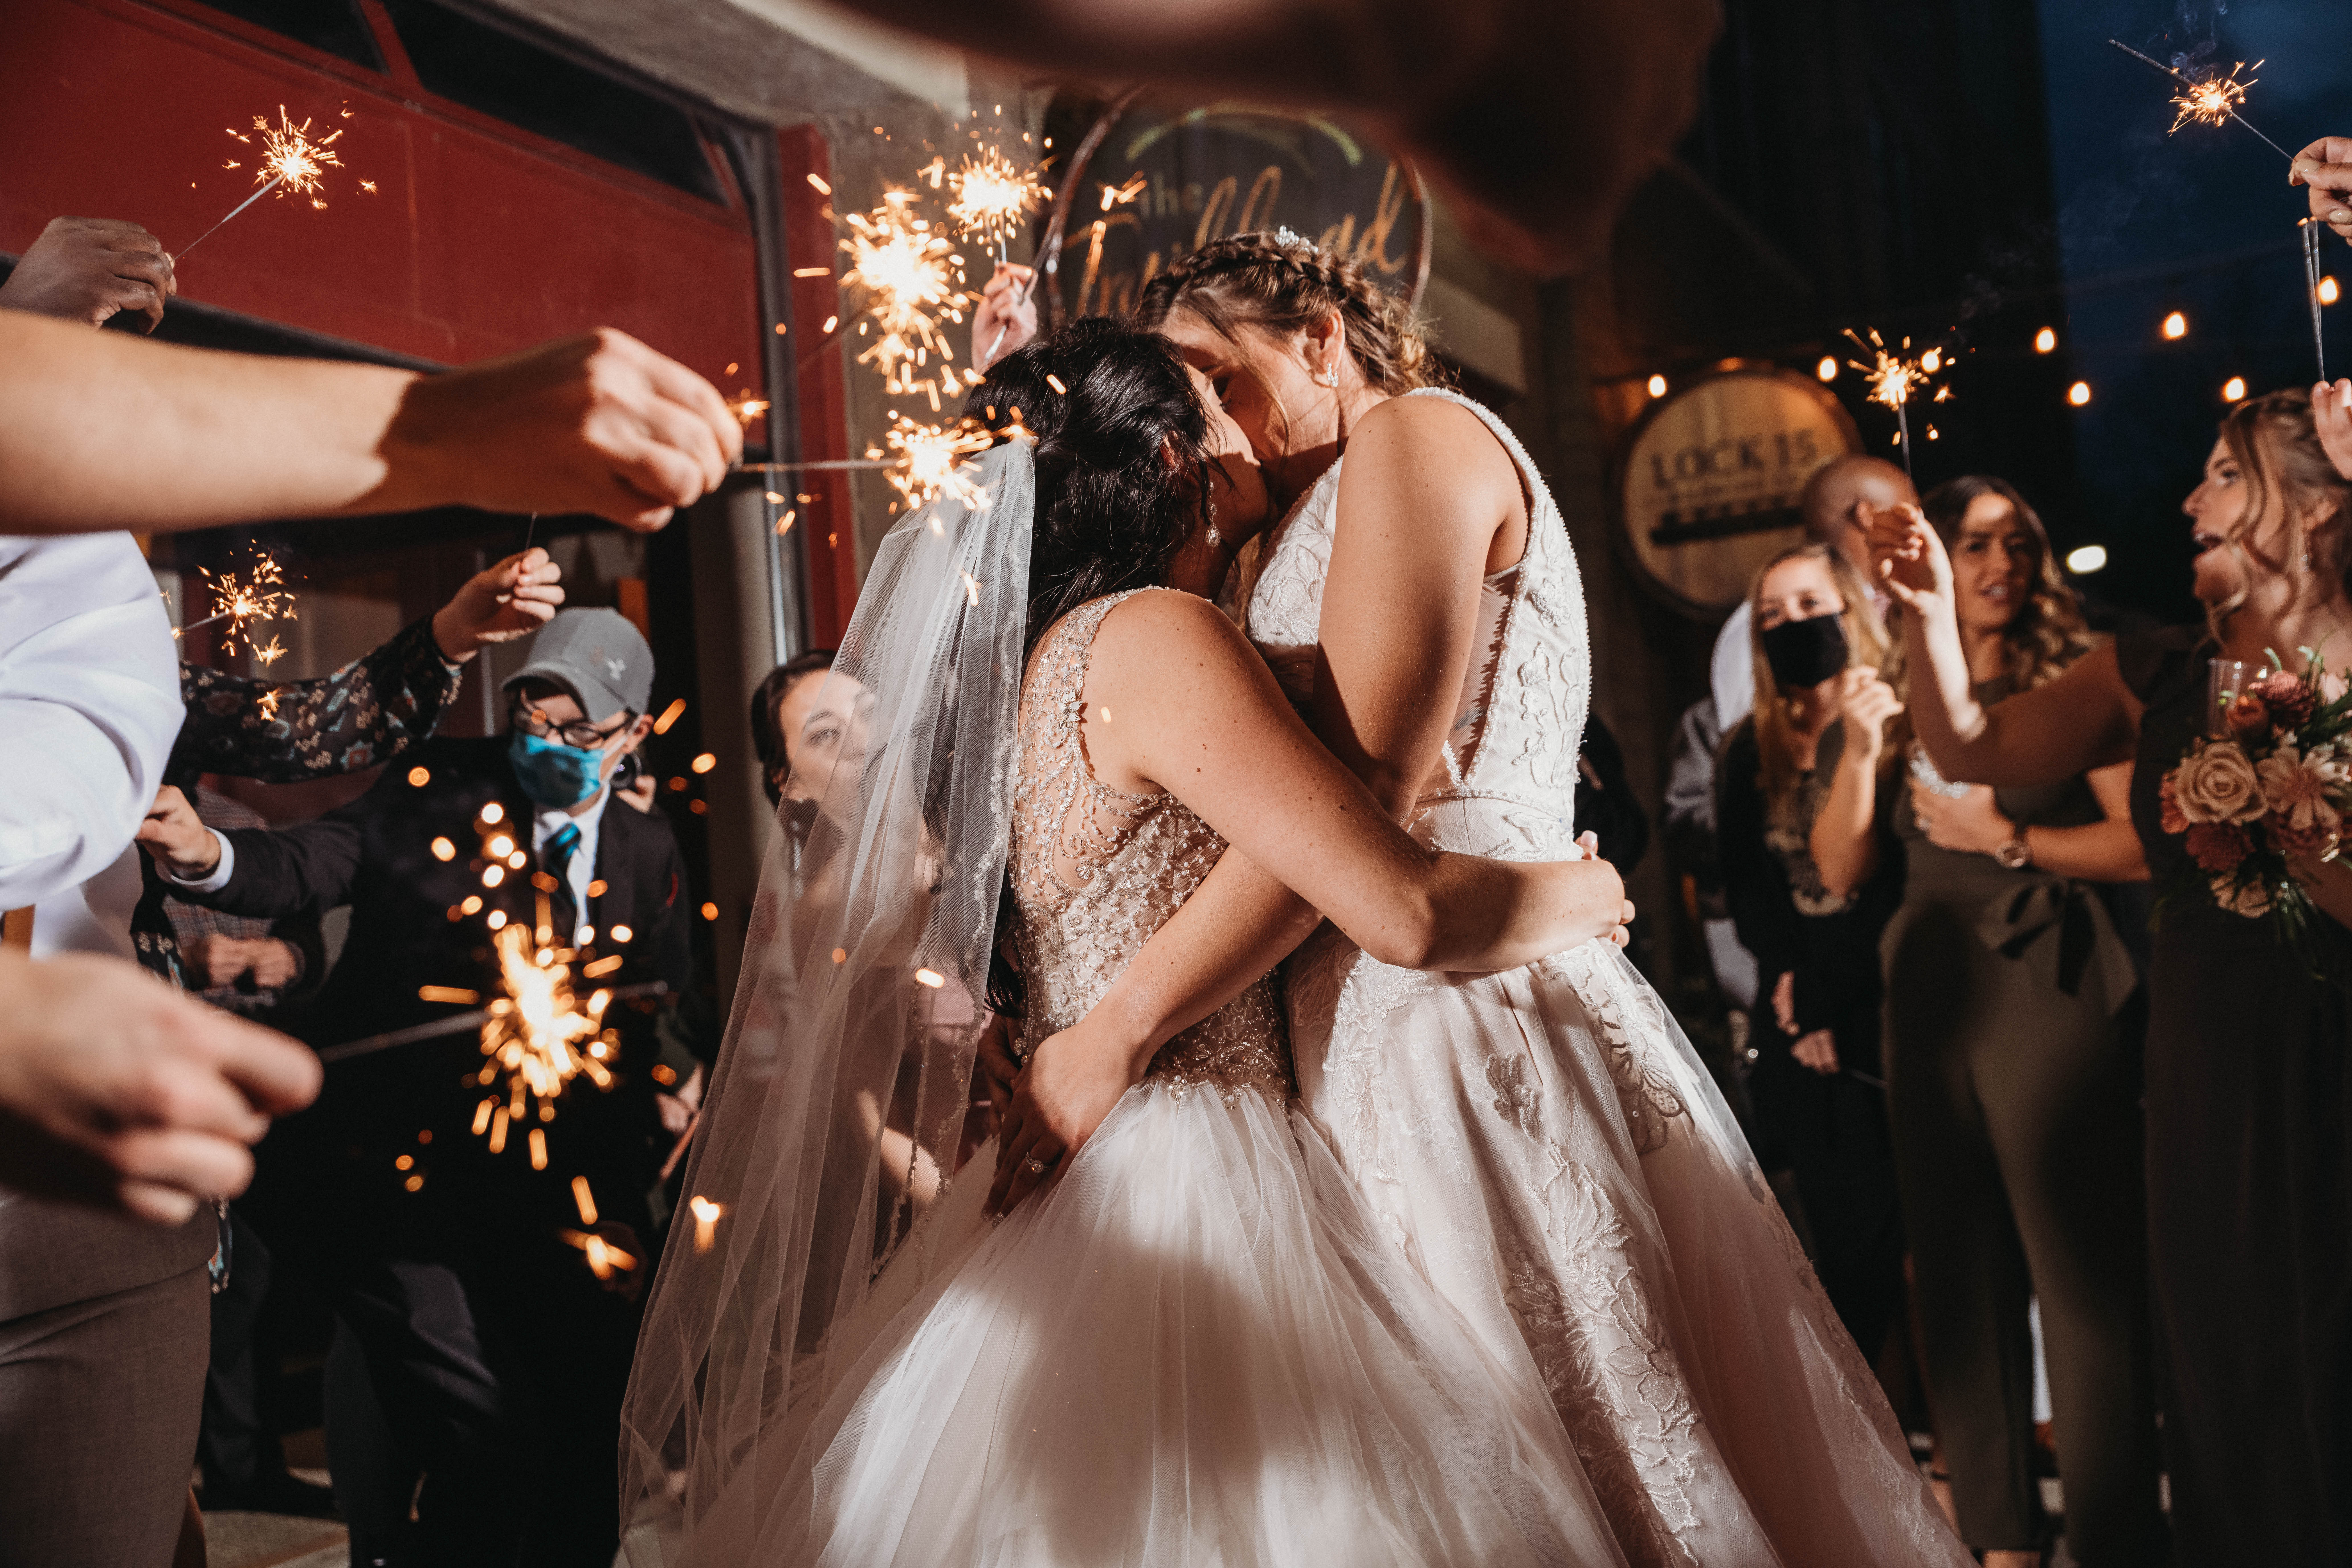 Two Brides kiss  and embrace during the sparkler exit of their wedding at Trailhead Venue in Akron.